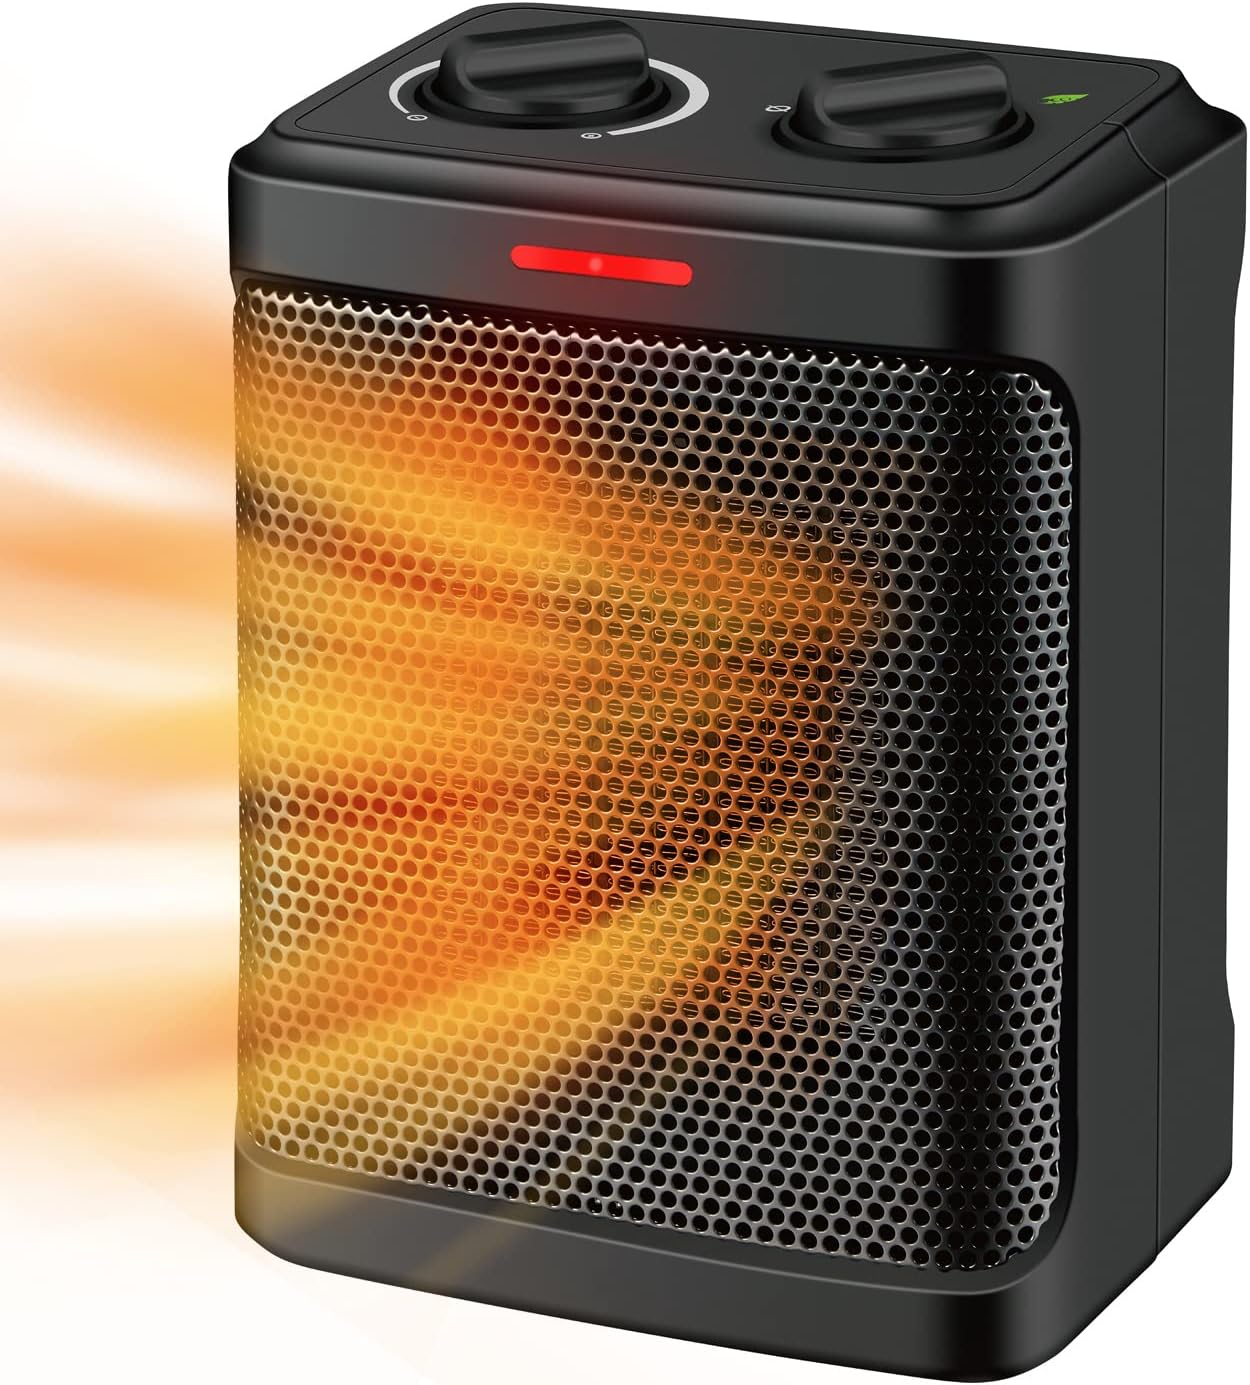 andily Space Heater Electric Heater for Home and Office Ceramic Small Heater with Thermostat, 750W/1500W - Andily Space Heater Electric Heater Review